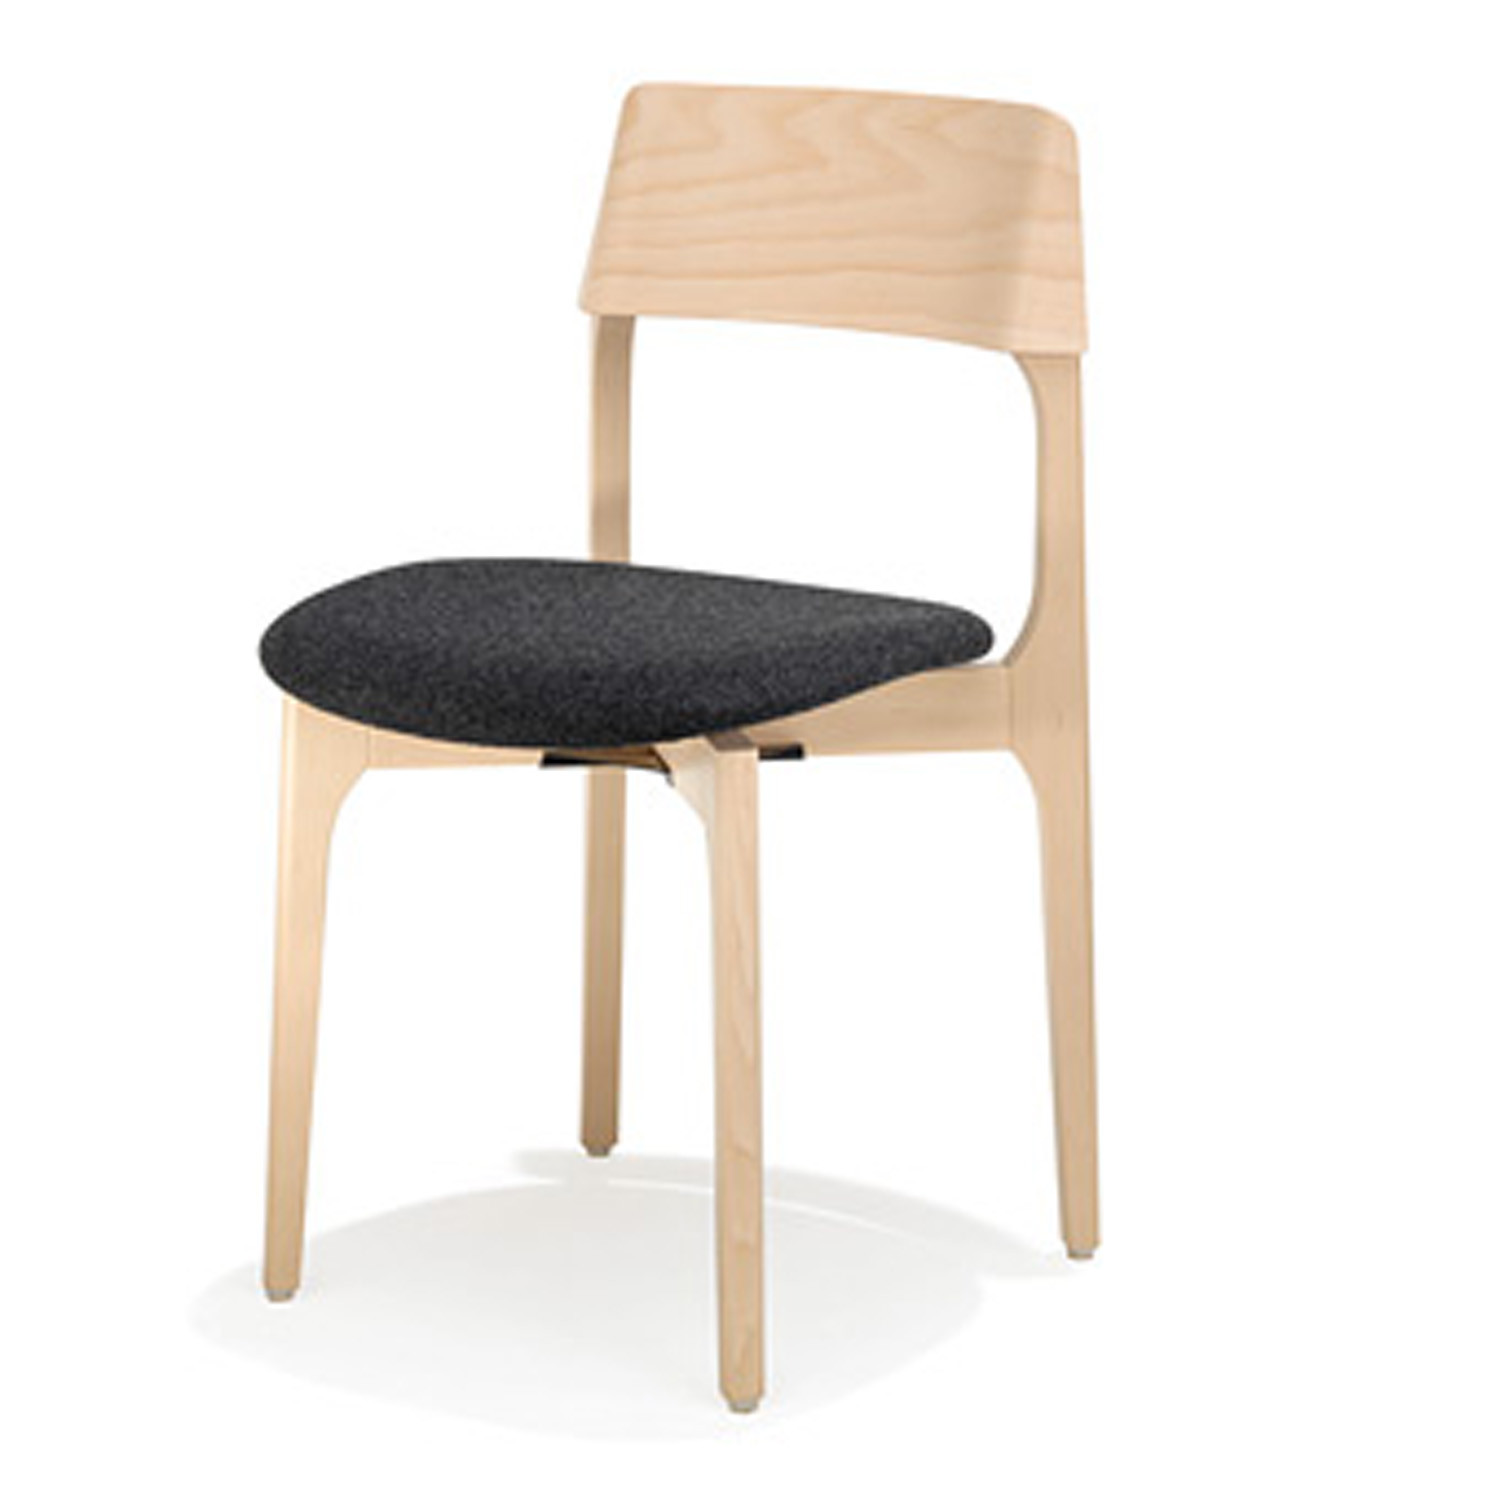 1010 Bina Chair with upholstered seat